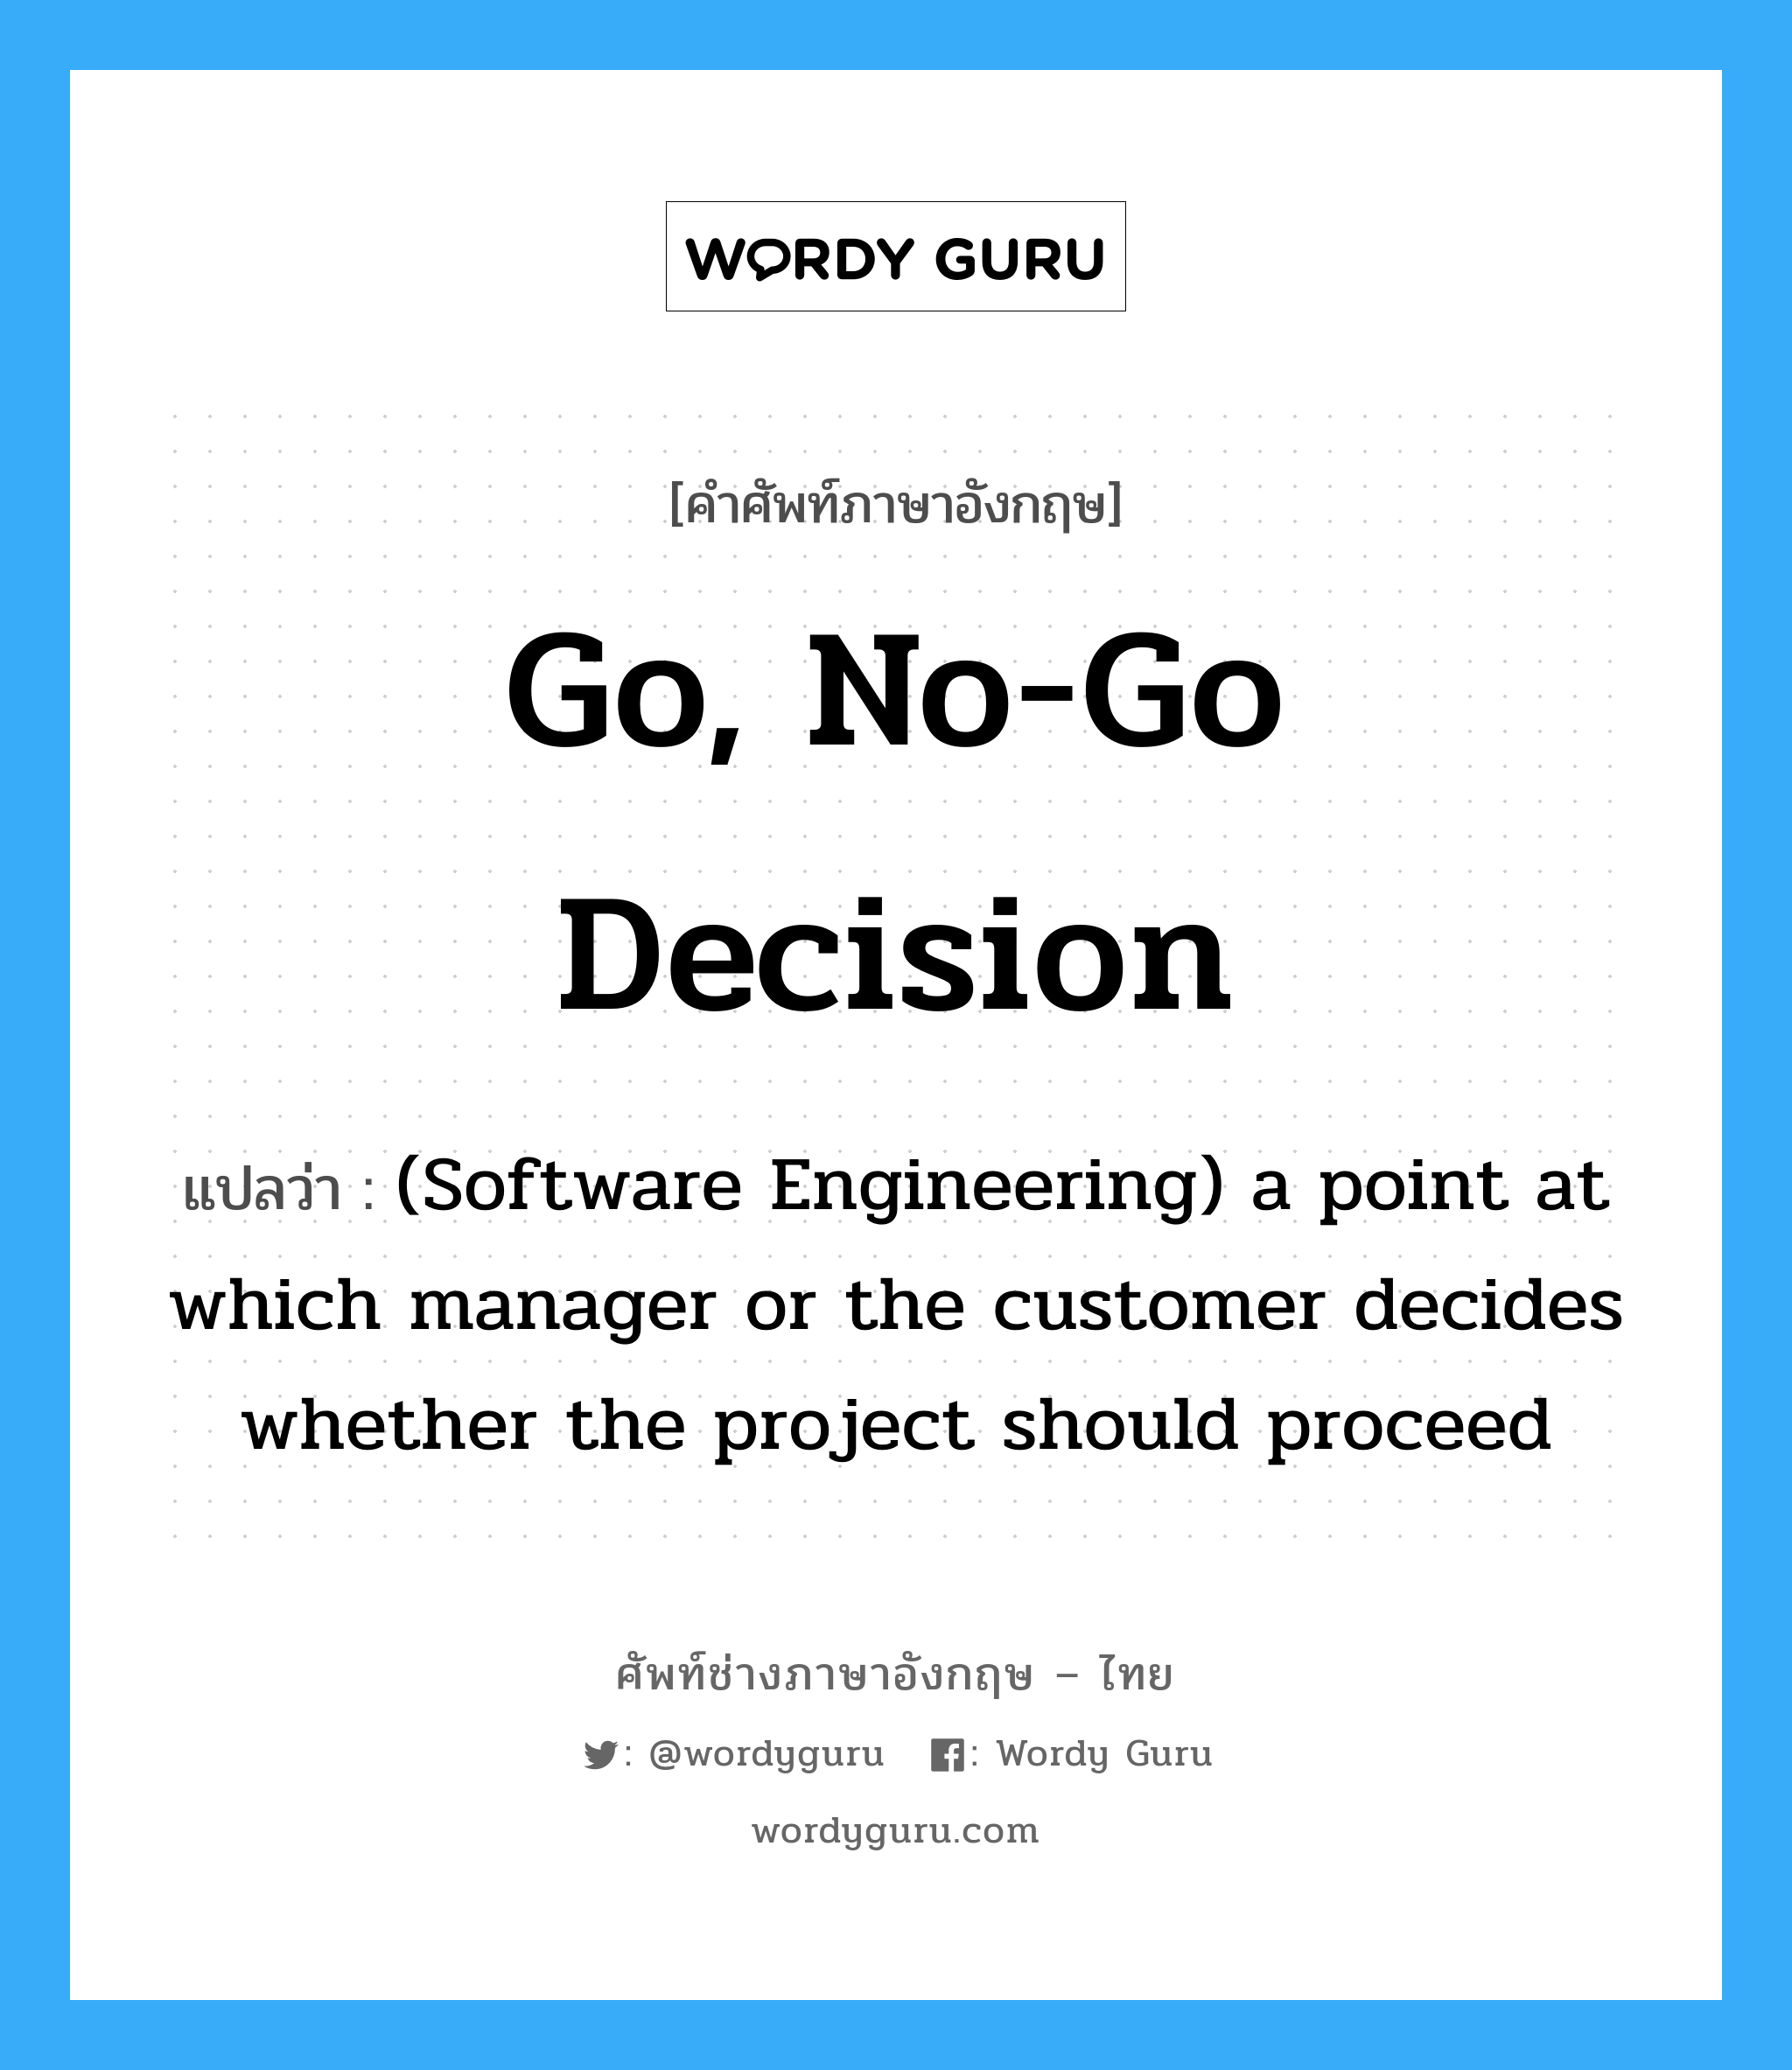 Go, no-go decision แปลว่า?, คำศัพท์ช่างภาษาอังกฤษ - ไทย Go, no-go decision คำศัพท์ภาษาอังกฤษ Go, no-go decision แปลว่า (Software Engineering) a point at which manager or the customer decides whether the project should proceed